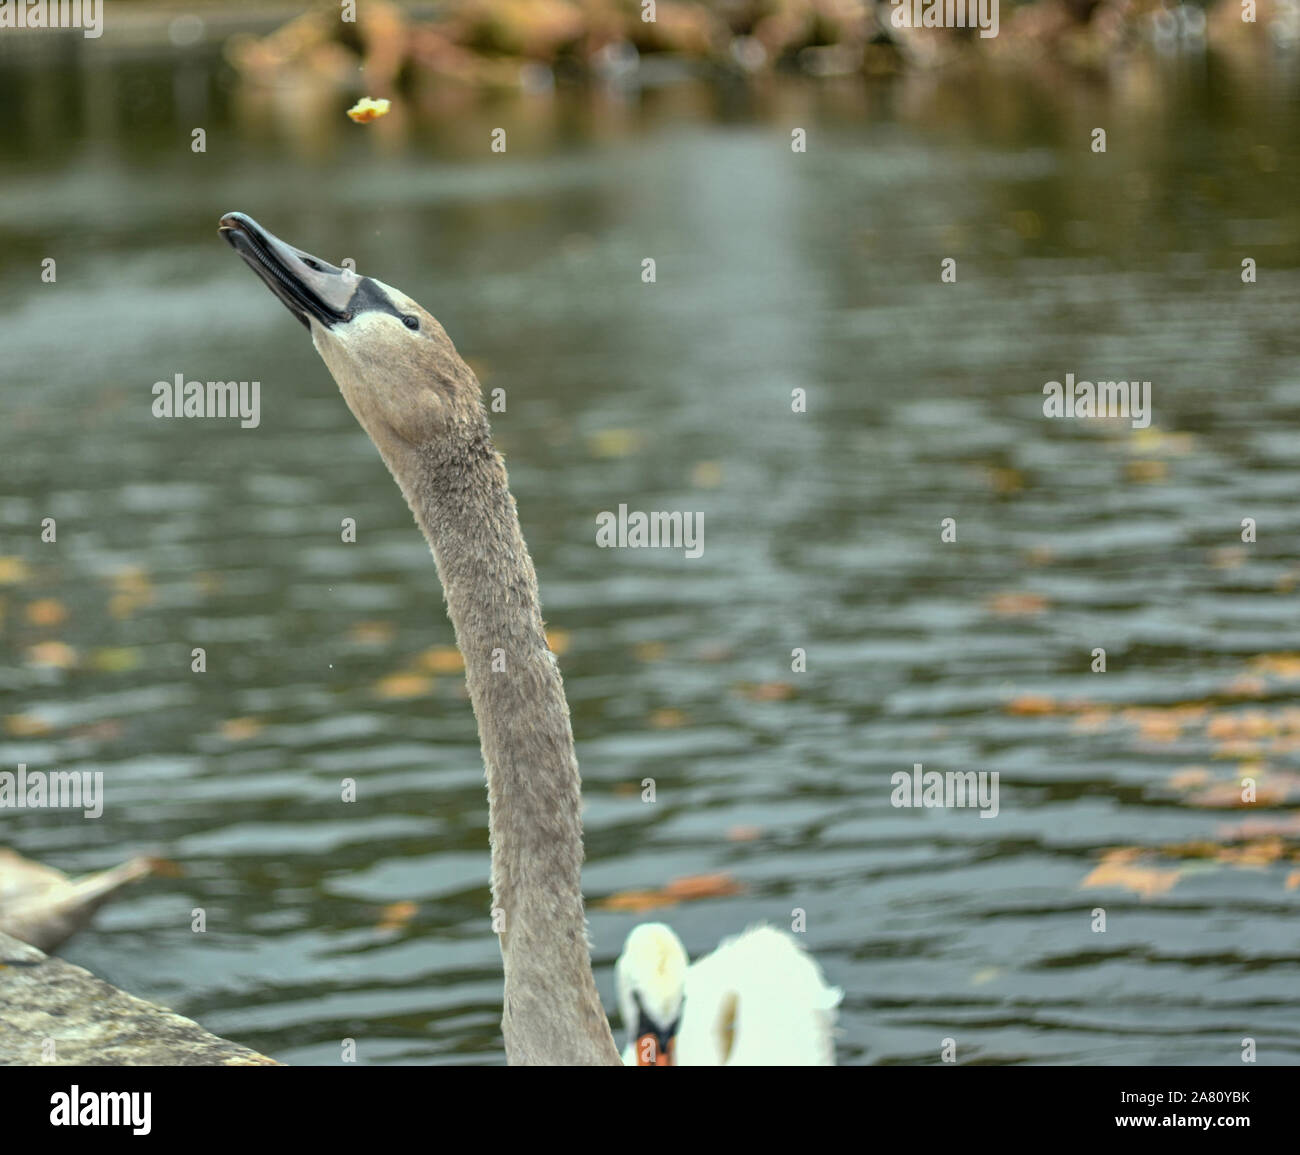 a close up shoot of a Swan reaching for food Stock Photo